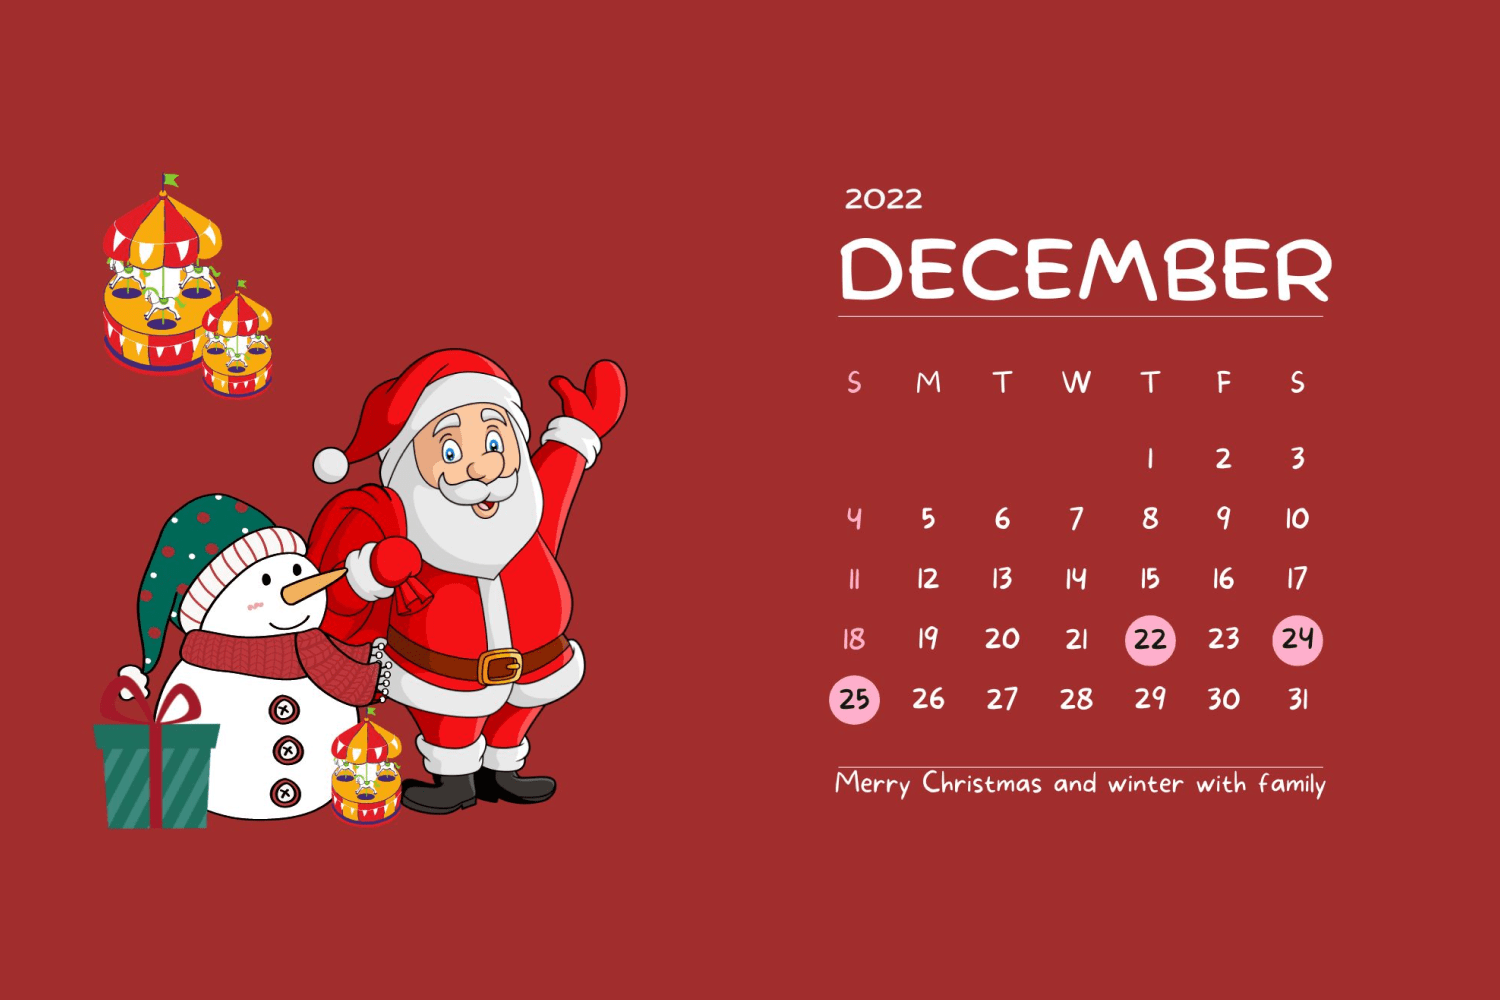 December calendar with drawn Santa Claus and snowman on red background.